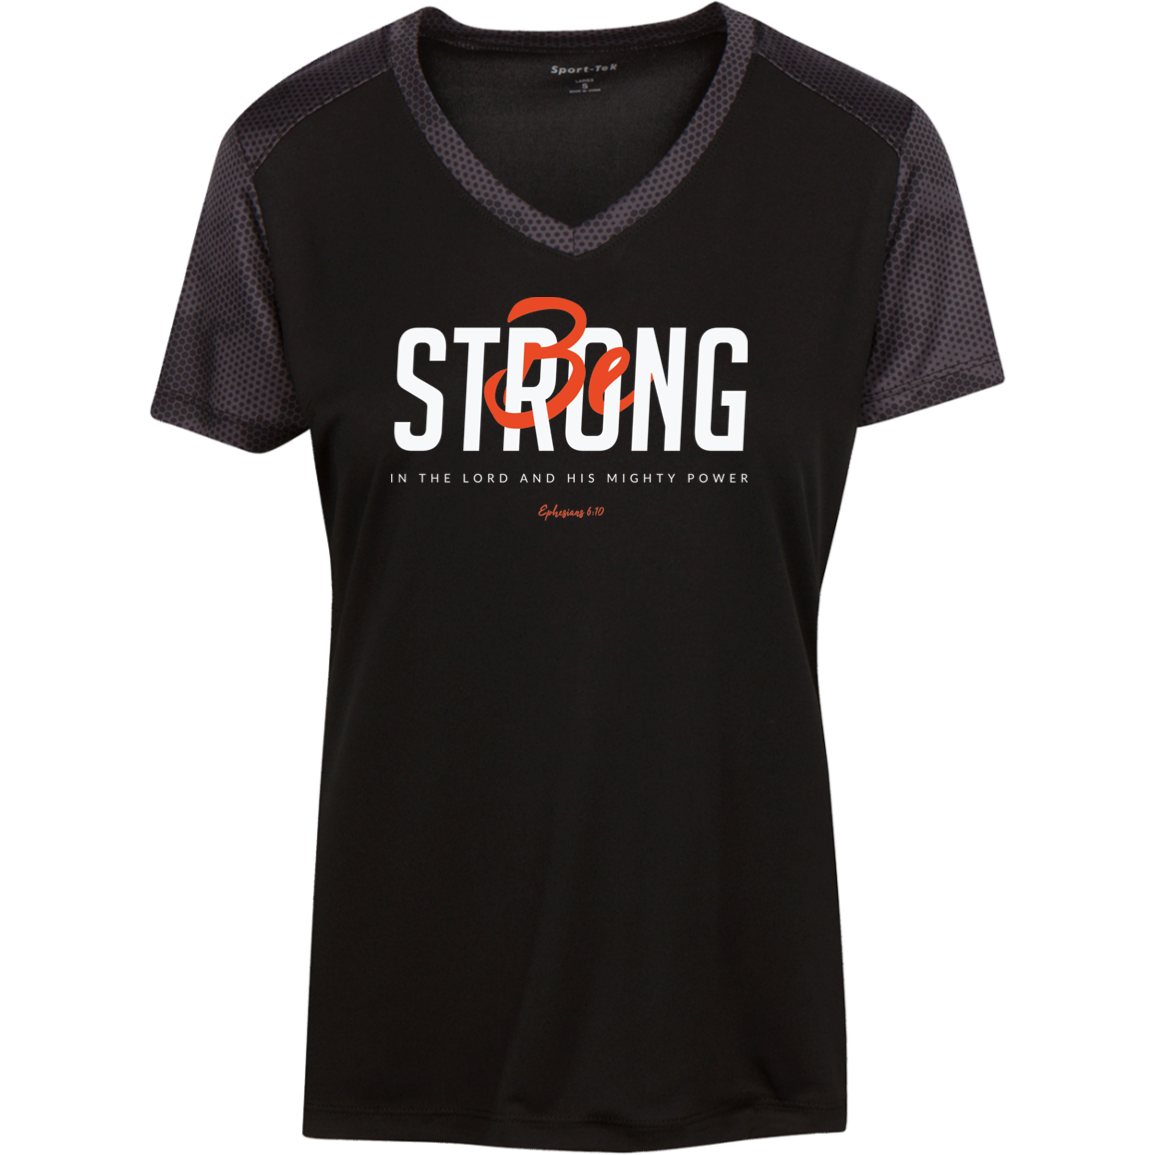 Be Strong | Ladies’ Colorblock T-Shirt